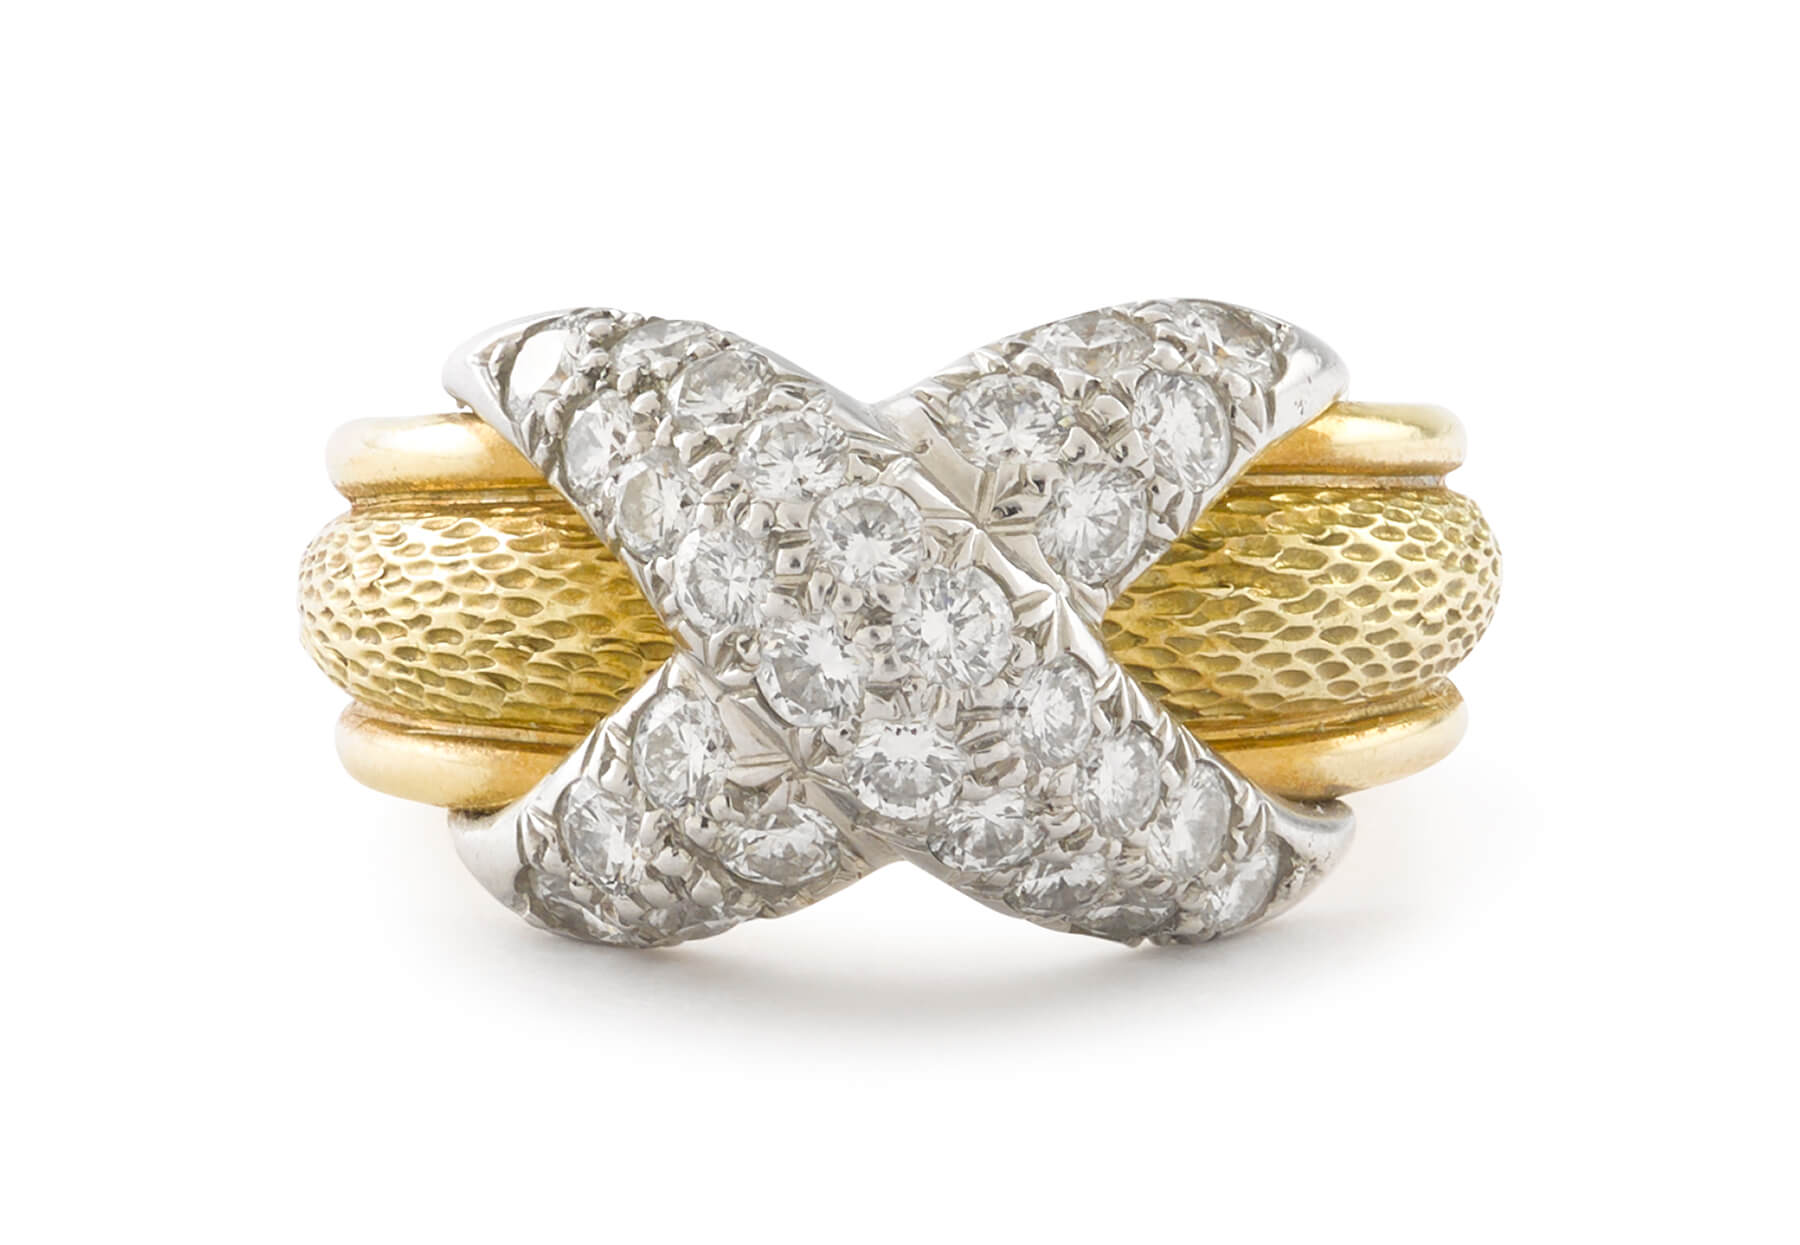 Tiffany & Co. Schlumberger® Vigne ring with diamonds.